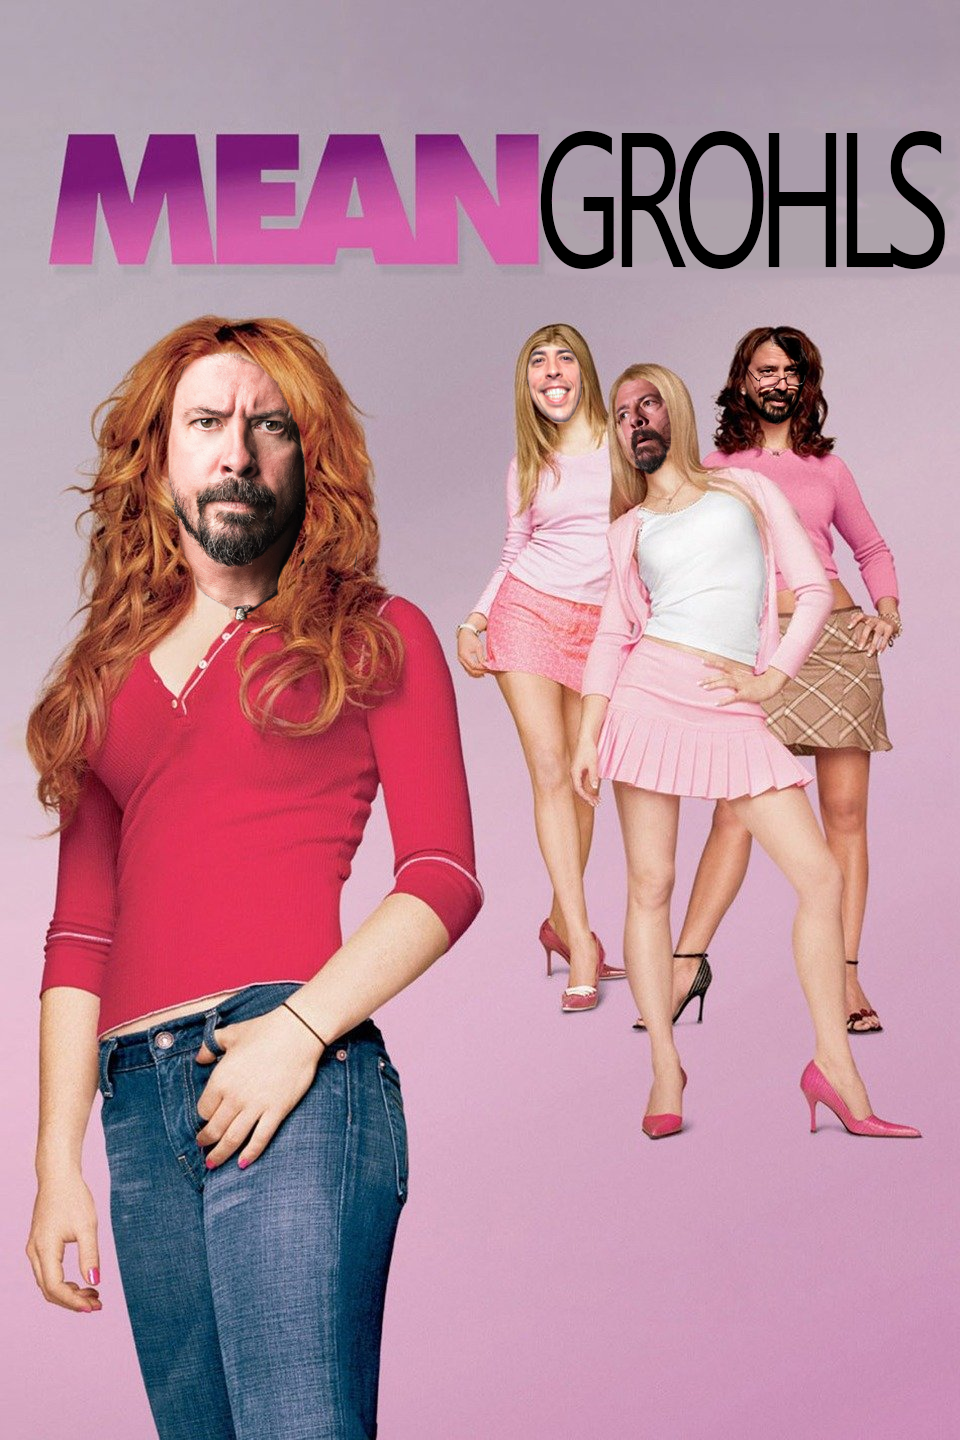 mean girls poster - Mean Grohls